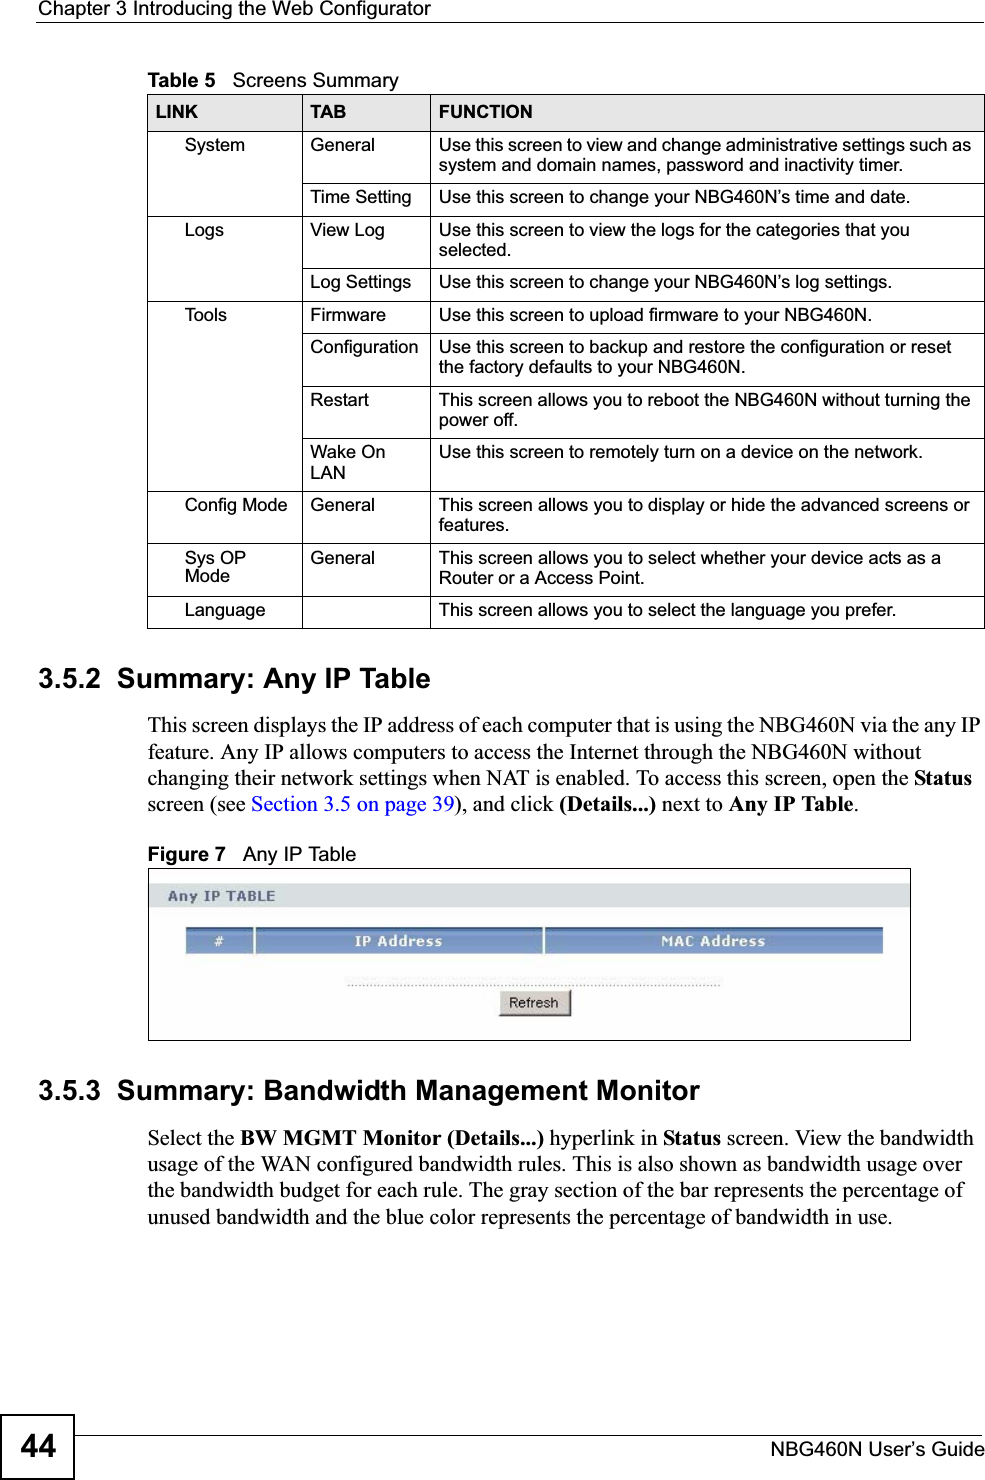 Chapter 3 Introducing the Web ConfiguratorNBG460N User’s Guide443.5.2  Summary: Any IP TableThis screen displays the IP address of each computer that is using the NBG460N via the any IP feature. Any IP allows computers to access the Internet through the NBG460N without changing their network settings when NAT is enabled. To access this screen, open the Statusscreen (see Section 3.5 on page 39), and click (Details...) next to Any IP Table.Figure 7   Any IP Table 3.5.3  Summary: Bandwidth Management MonitorSelect the BW MGMT Monitor (Details...) hyperlink in Status screen. View the bandwidth usage of the WAN configured bandwidth rules. This is also shown as bandwidth usage over the bandwidth budget for each rule. The gray section of the bar represents the percentage of unused bandwidth and the blue color represents the percentage of bandwidth in use.System General Use this screen to view and change administrative settings such as system and domain names, password and inactivity timer.Time Setting Use this screen to change your NBG460N’s time and date.Logs View Log Use this screen to view the logs for the categories that you selected.Log Settings Use this screen to change your NBG460N’s log settings.To o l s Firmware Use this screen to upload firmware to your NBG460N.Configuration Use this screen to backup and restore the configuration or reset the factory defaults to your NBG460N. Restart This screen allows you to reboot the NBG460N without turning the power off.Wake On LANUse this screen to remotely turn on a device on the network.Config Mode General This screen allows you to display or hide the advanced screens or features.Sys OP ModeGeneral This screen allows you to select whether your device acts as a Router or a Access Point.Language This screen allows you to select the language you prefer.Table 5   Screens SummaryLINK TAB FUNCTION